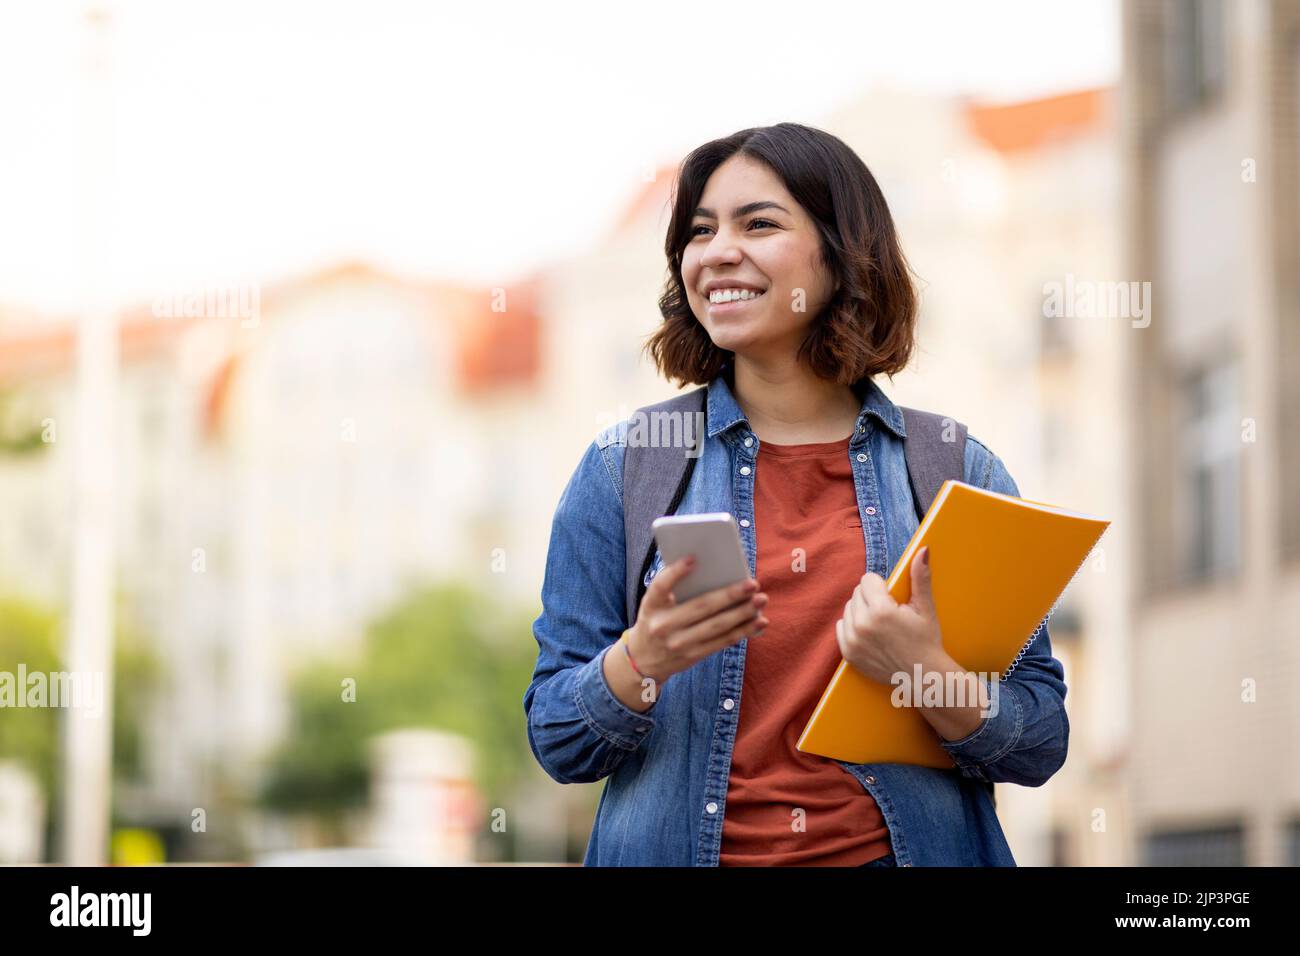 Cheerful Arab Female Student With Smartphone And Workbooks Standing Outdoors Stock Photo